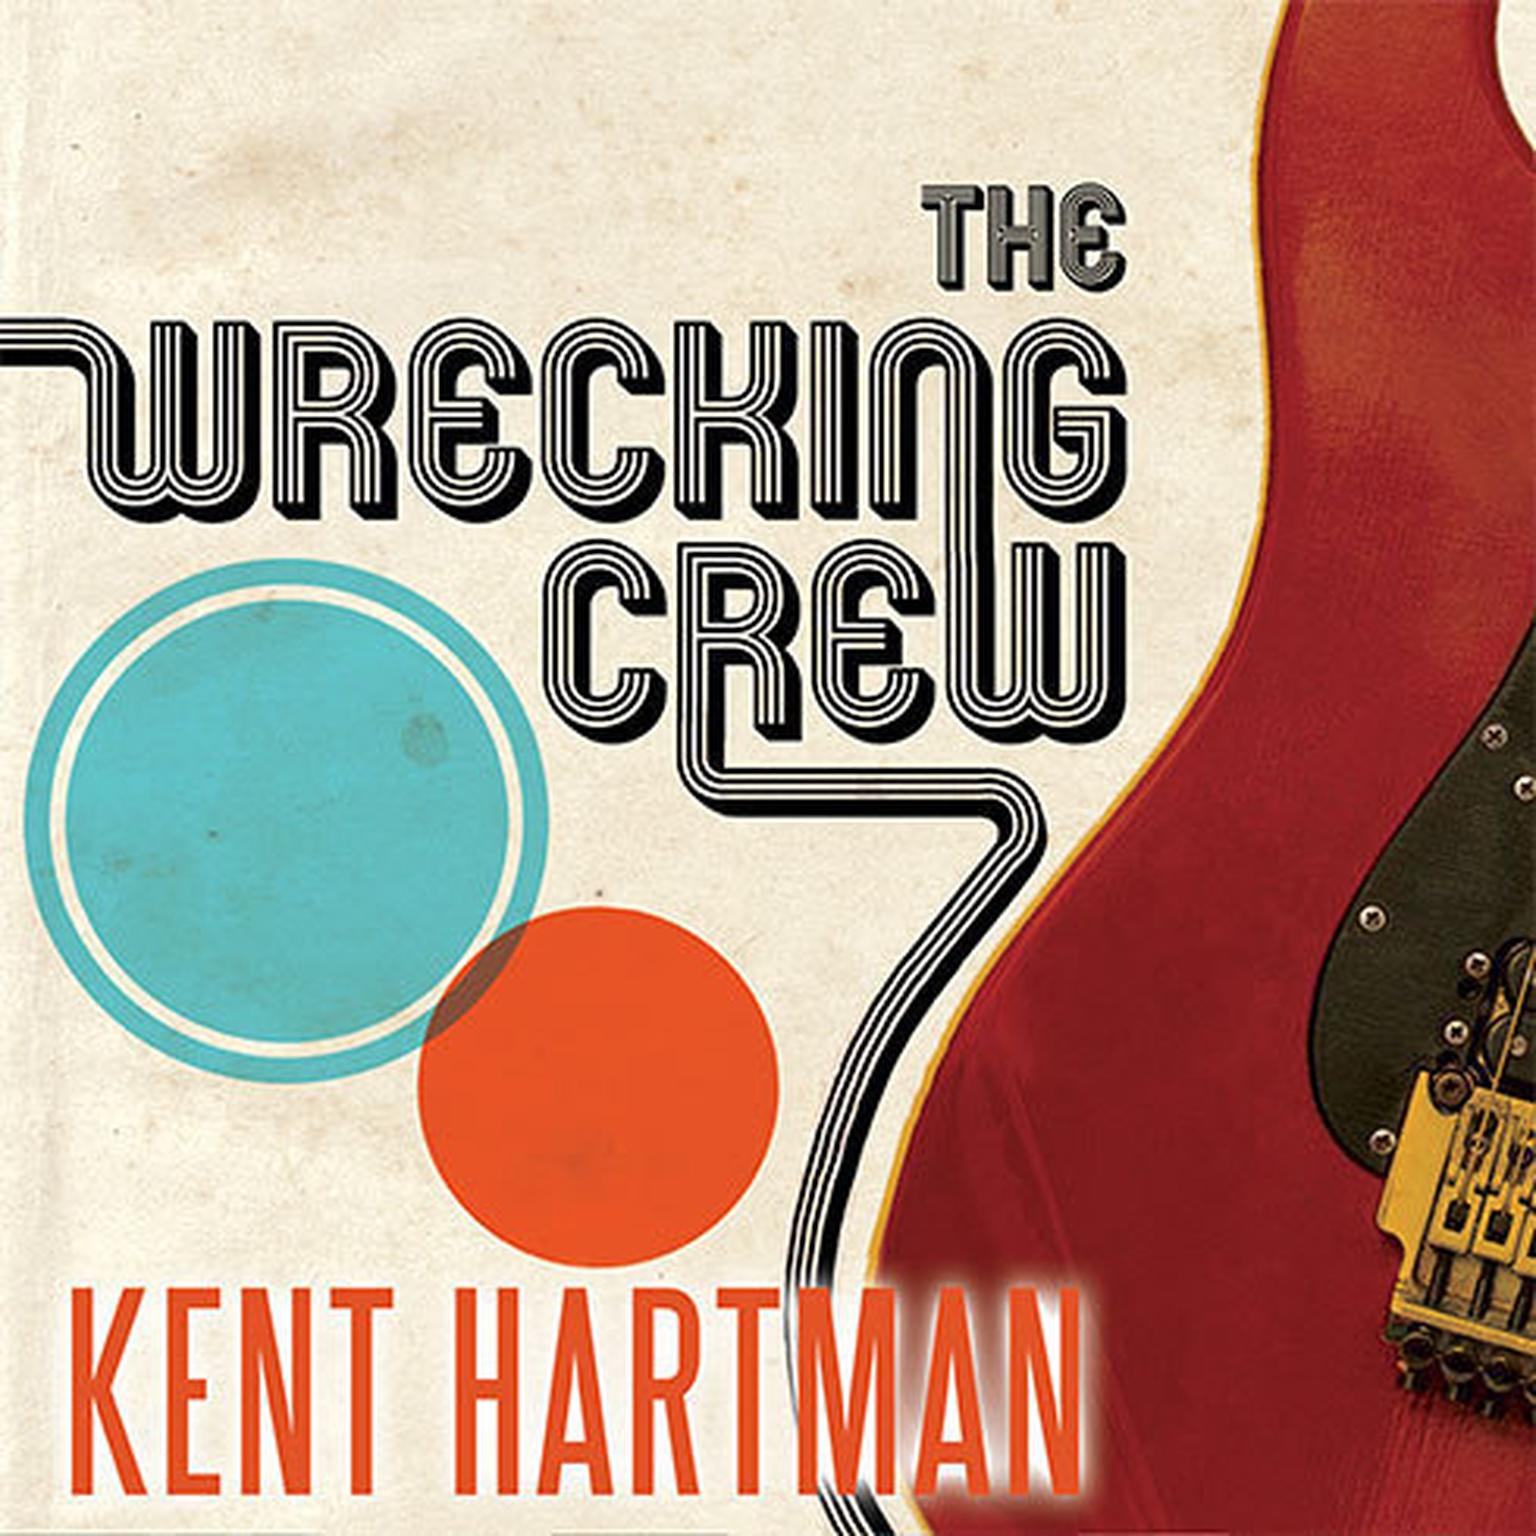 The Wrecking Crew: The Inside Story of Rock and Rolls Best-Kept Secret Audiobook, by Kent Hartman